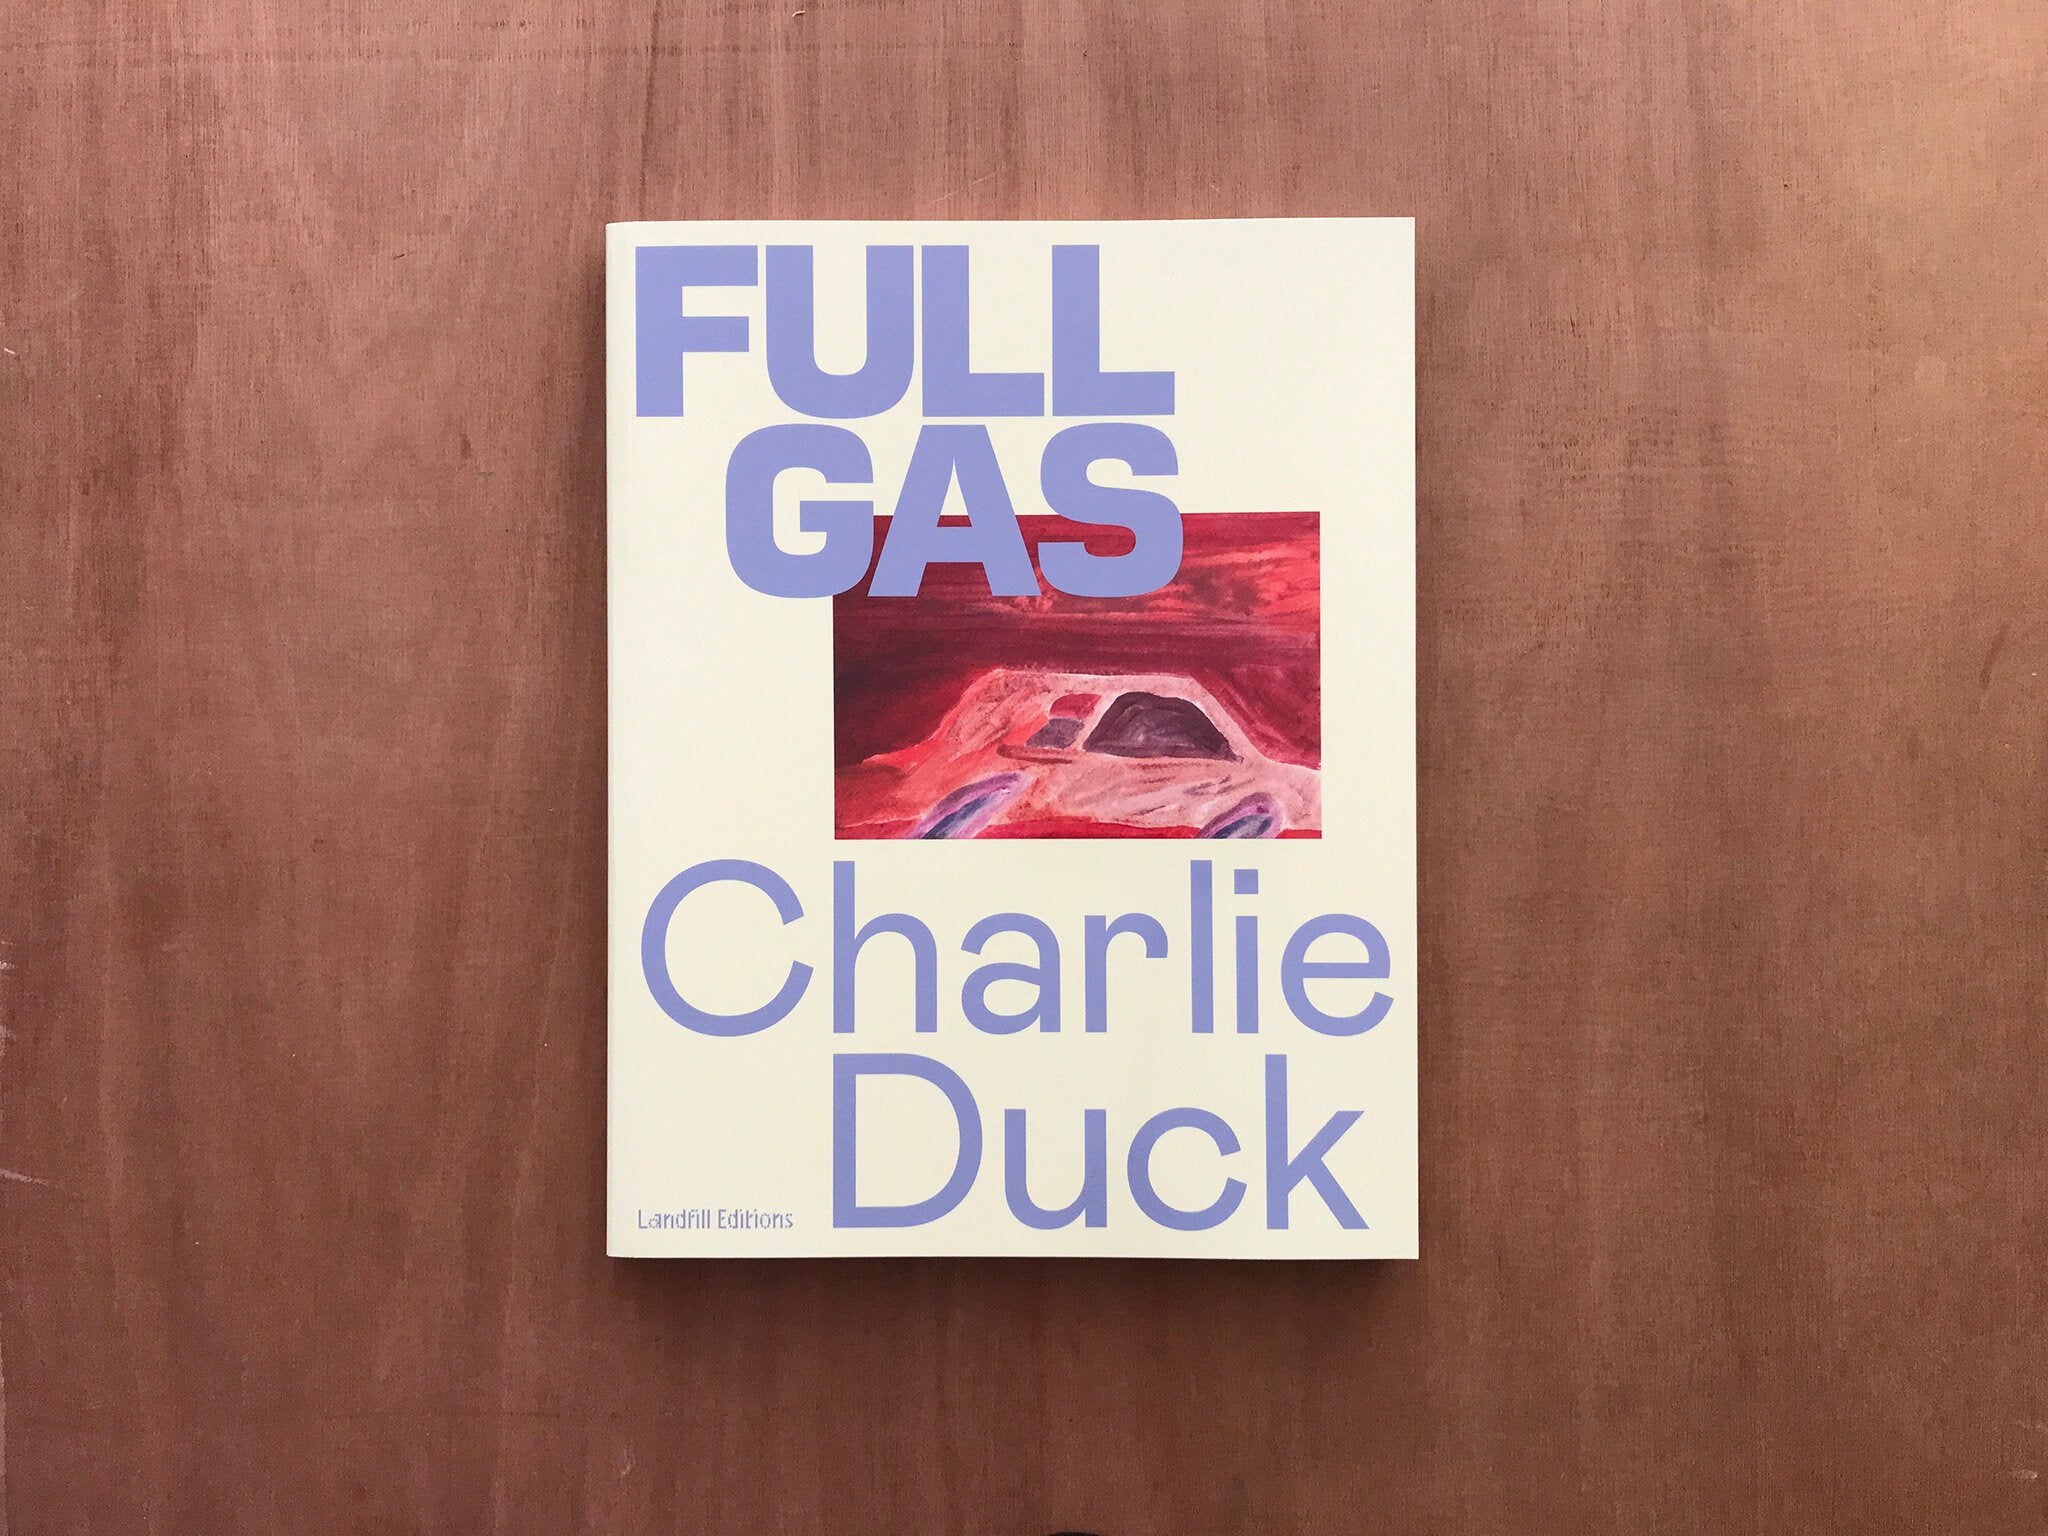 FULL GAS by Charlie Duck